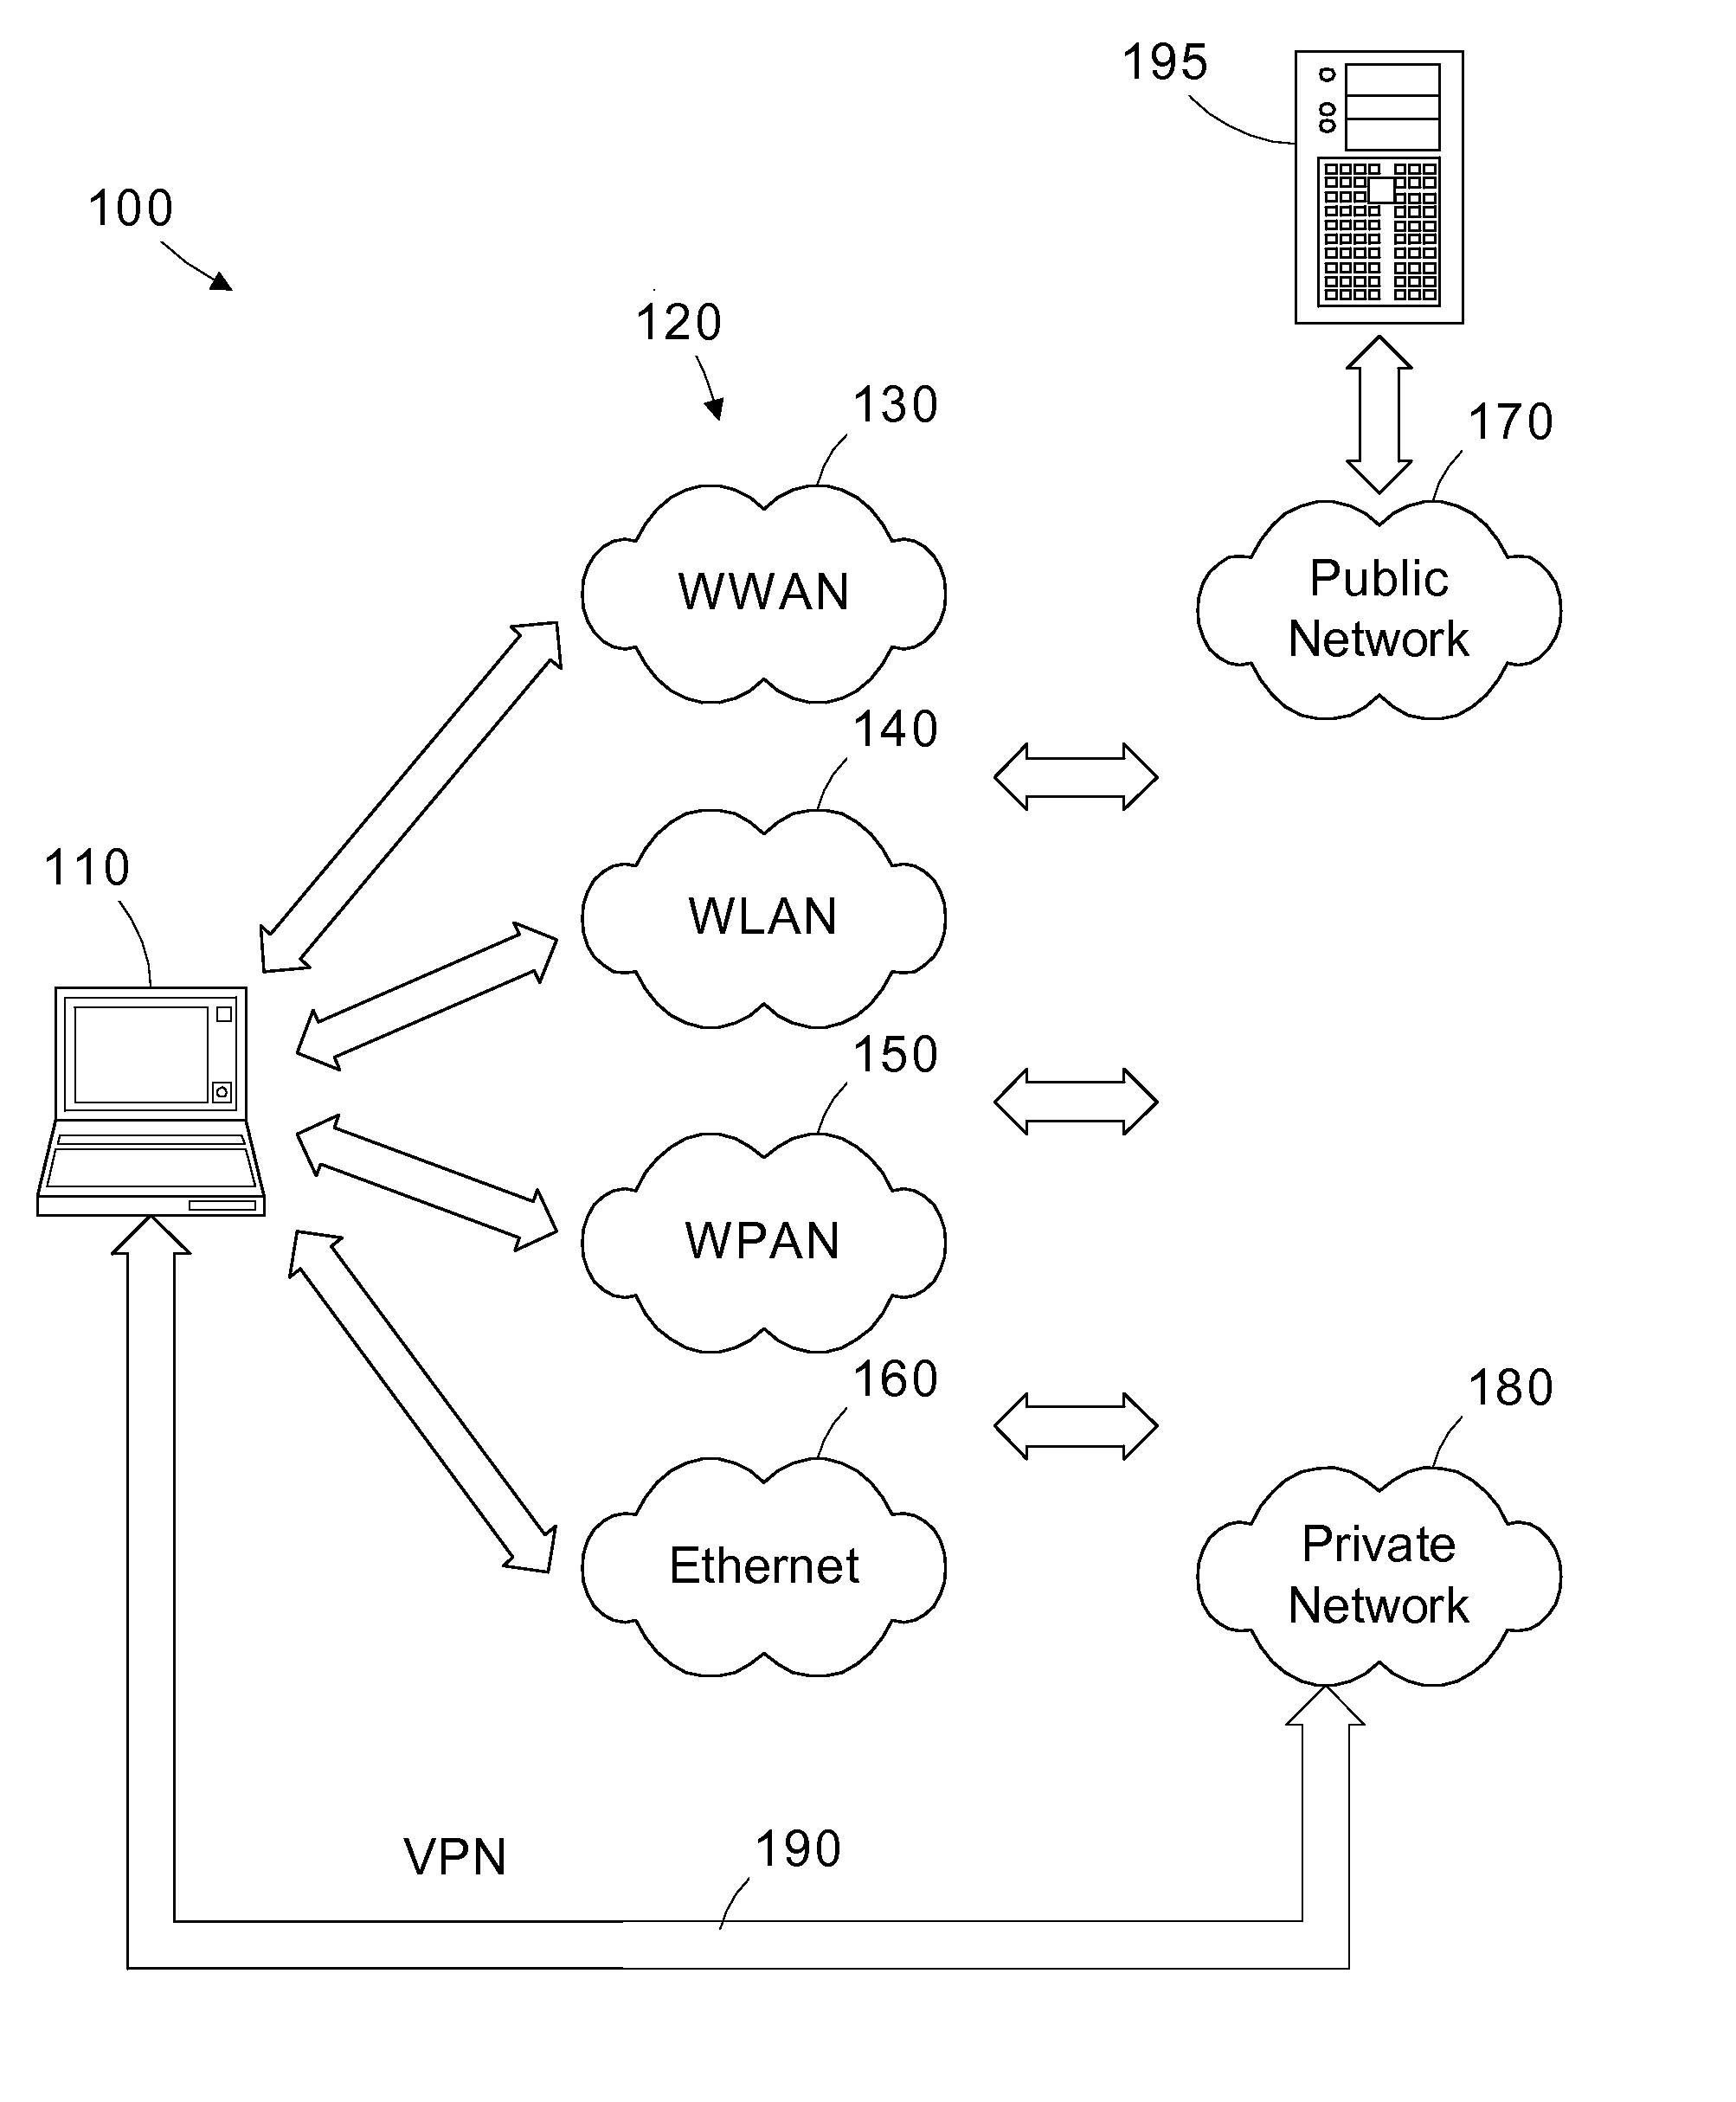 Connection manager with selective support determination based on problem diagnosis